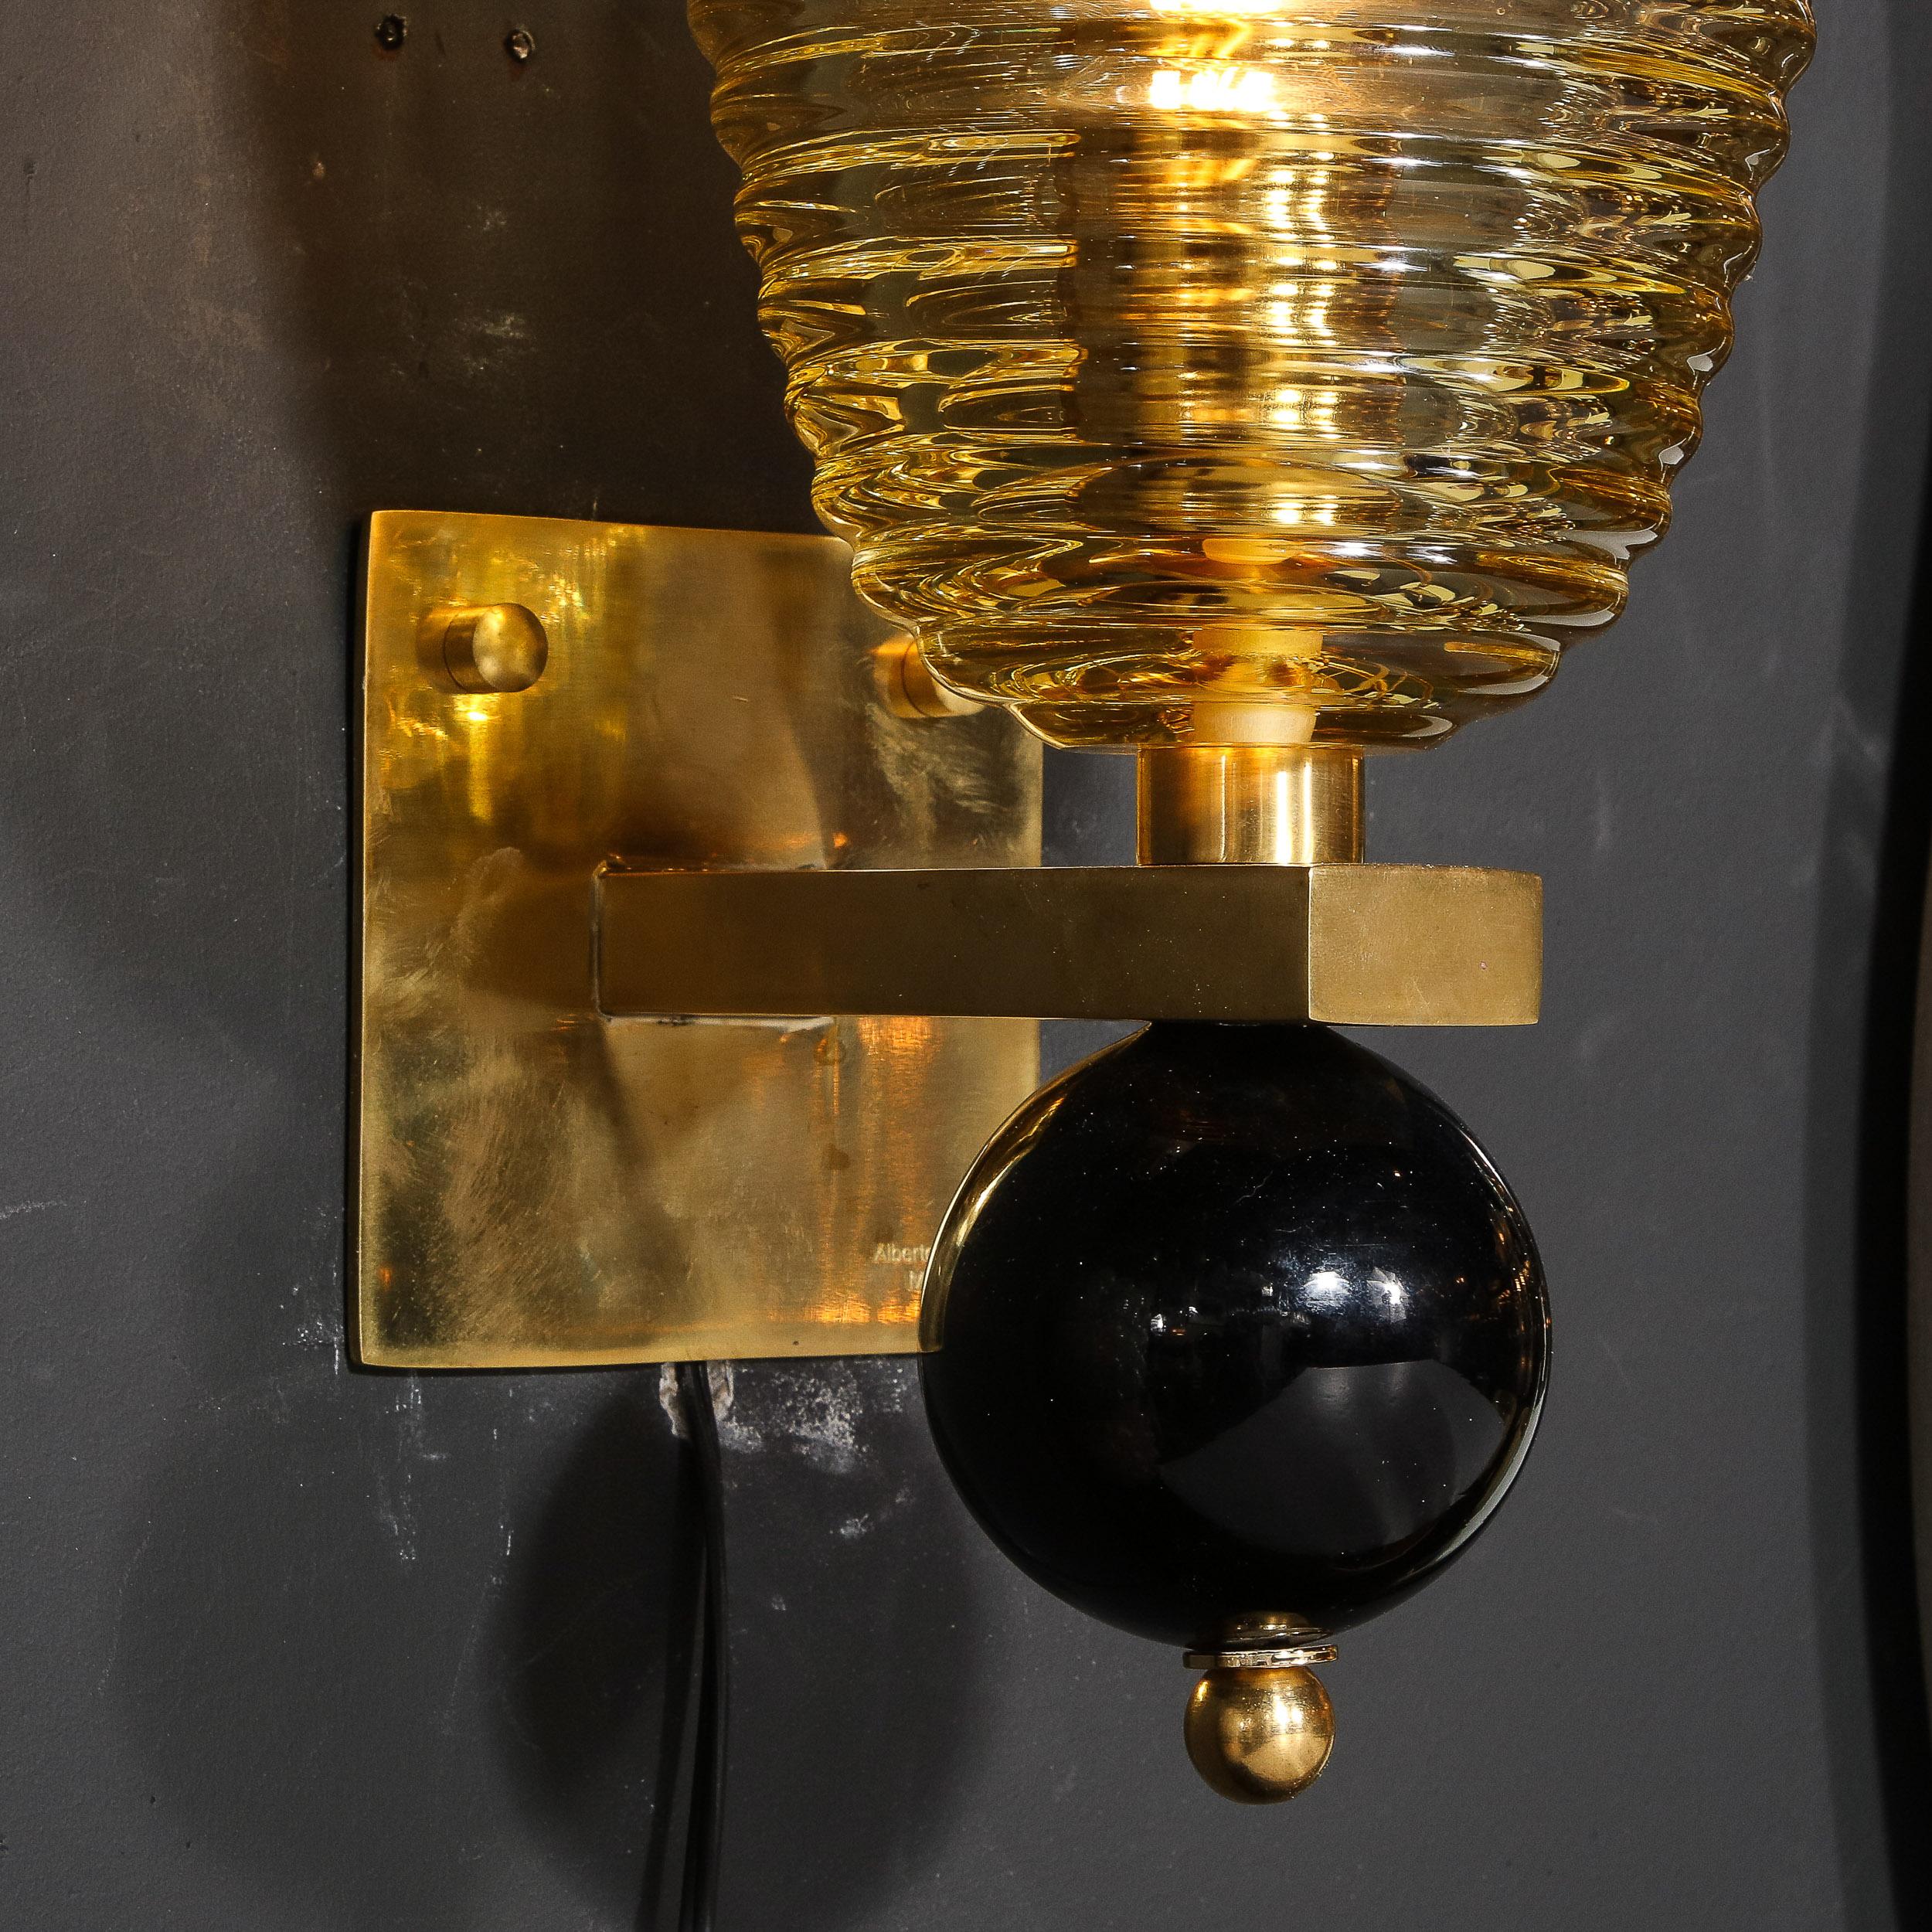 Pair of Modernist Hand-Blown Murano Hive Glass Form Sconces w/ Jet Black Orbital In New Condition For Sale In New York, NY